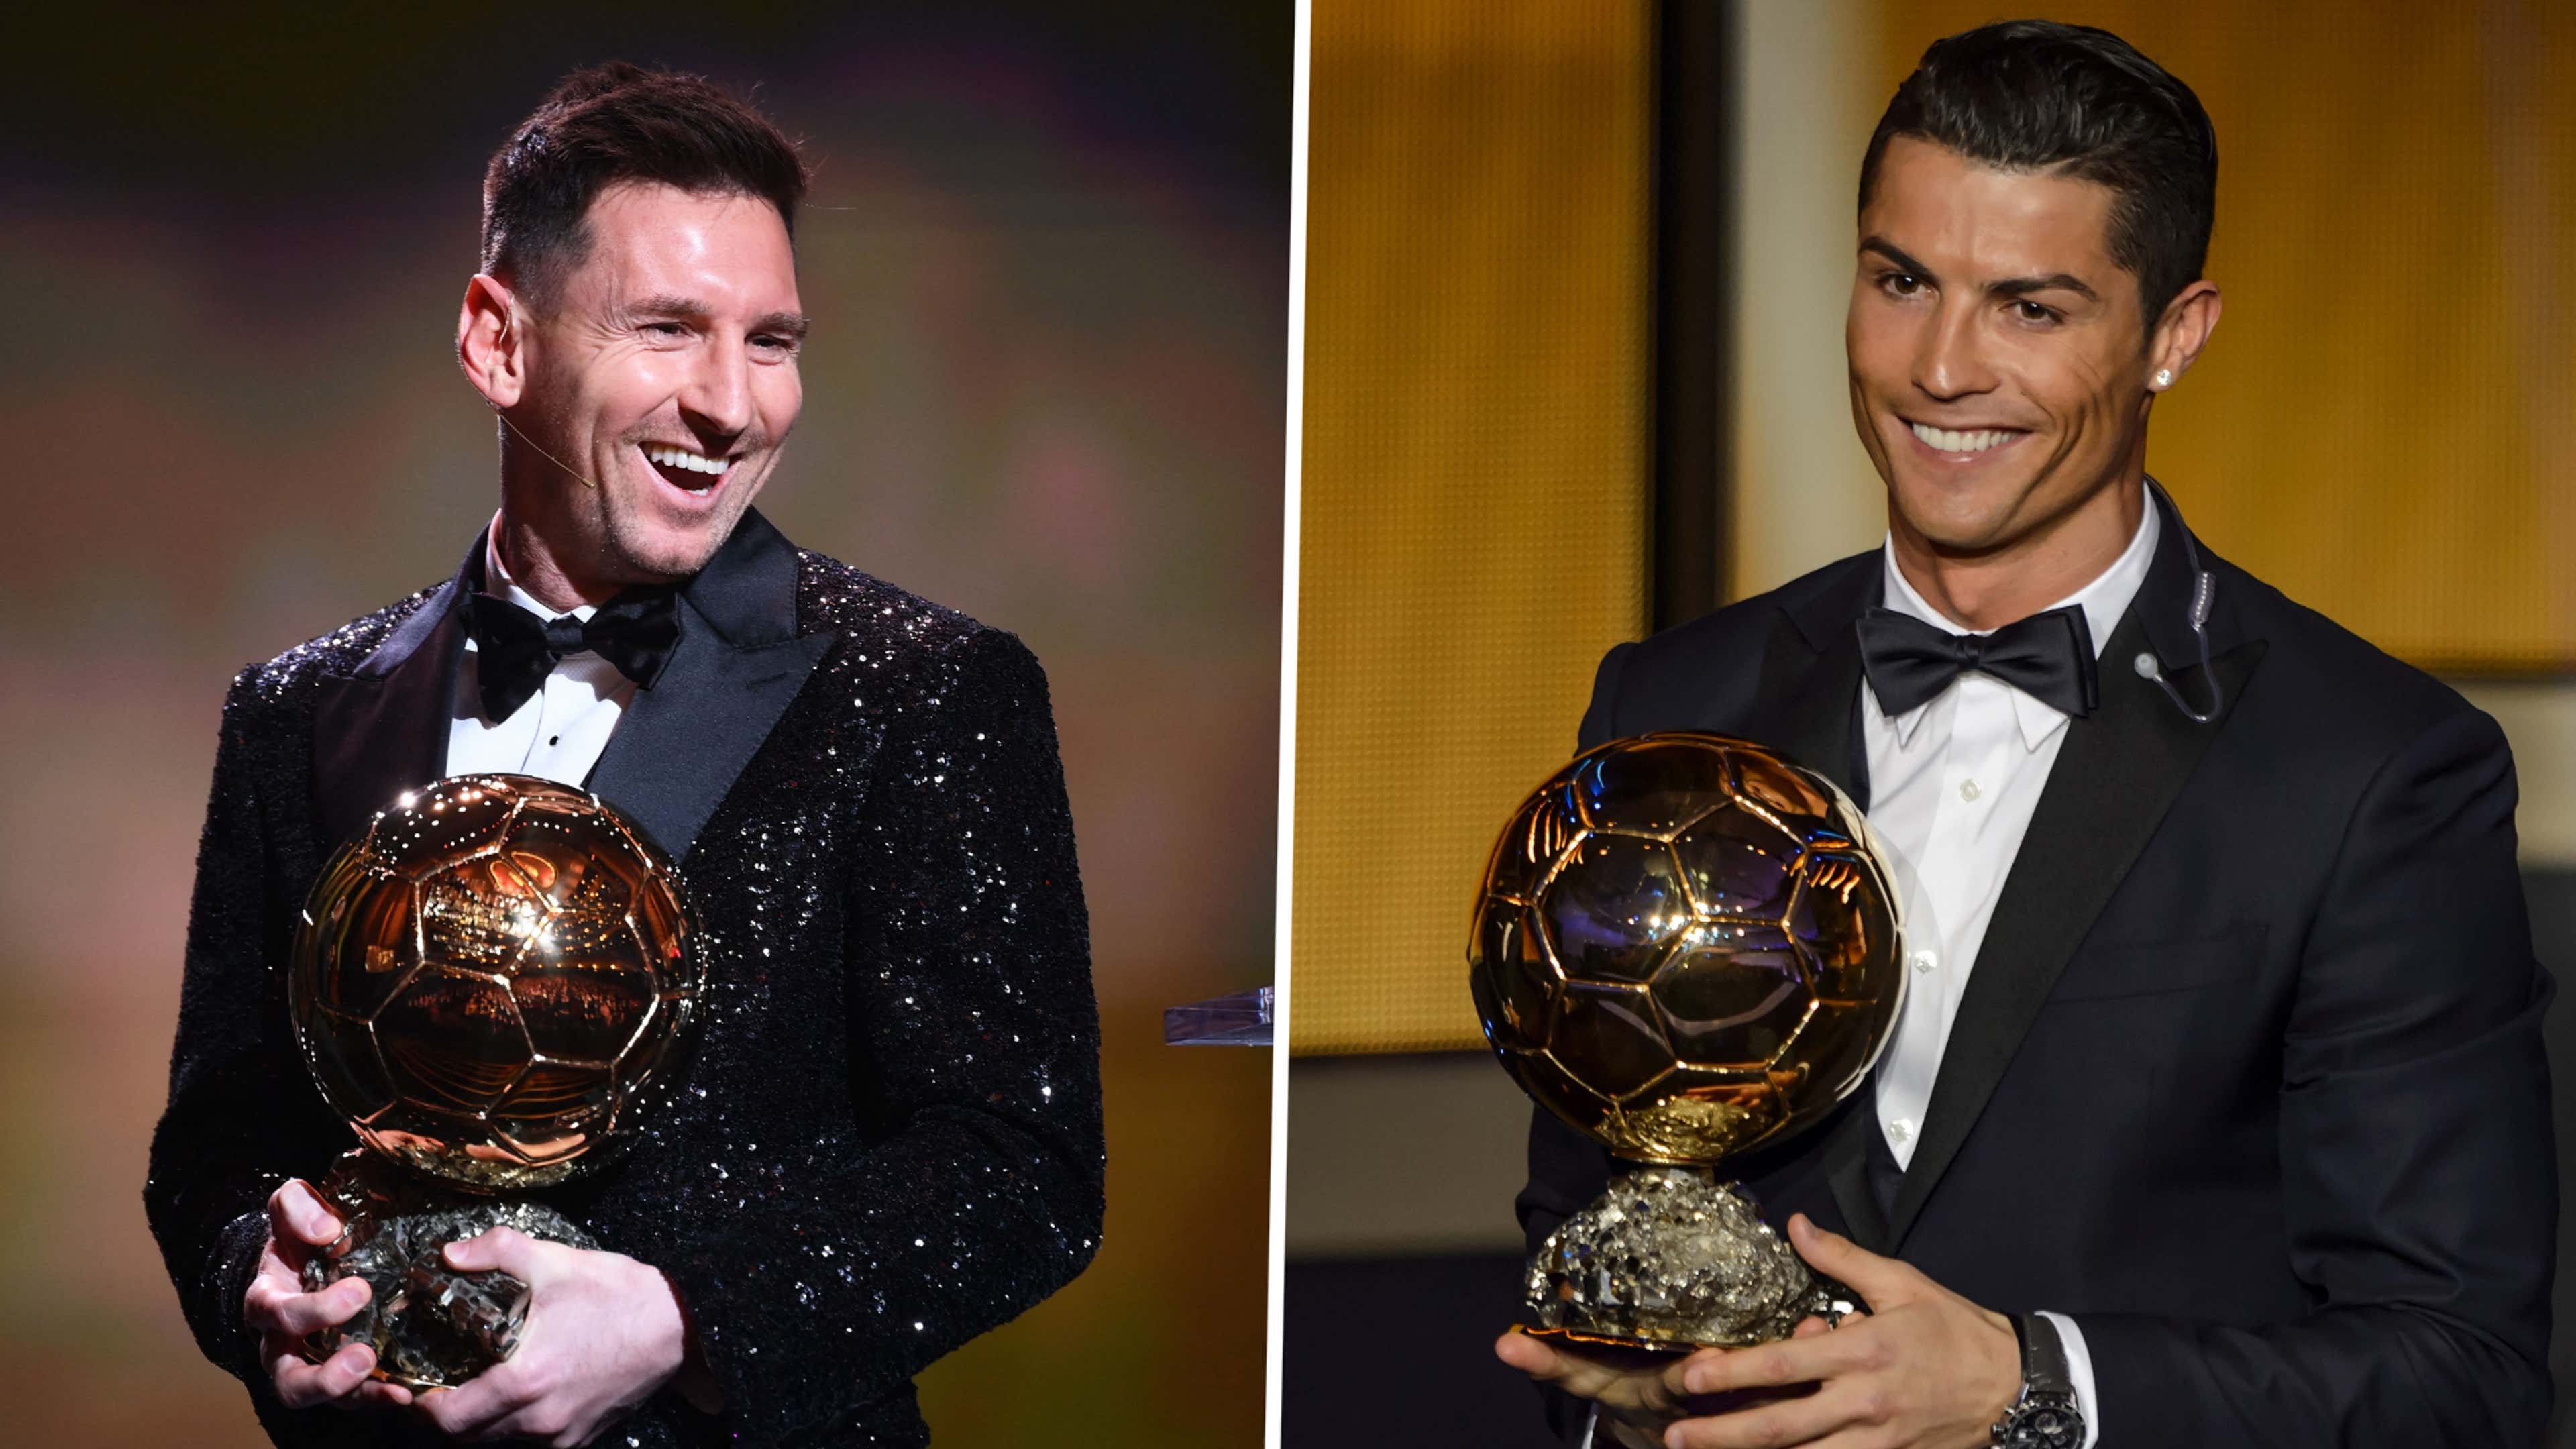 What is the Ballon d'Or? Everything to know about the most